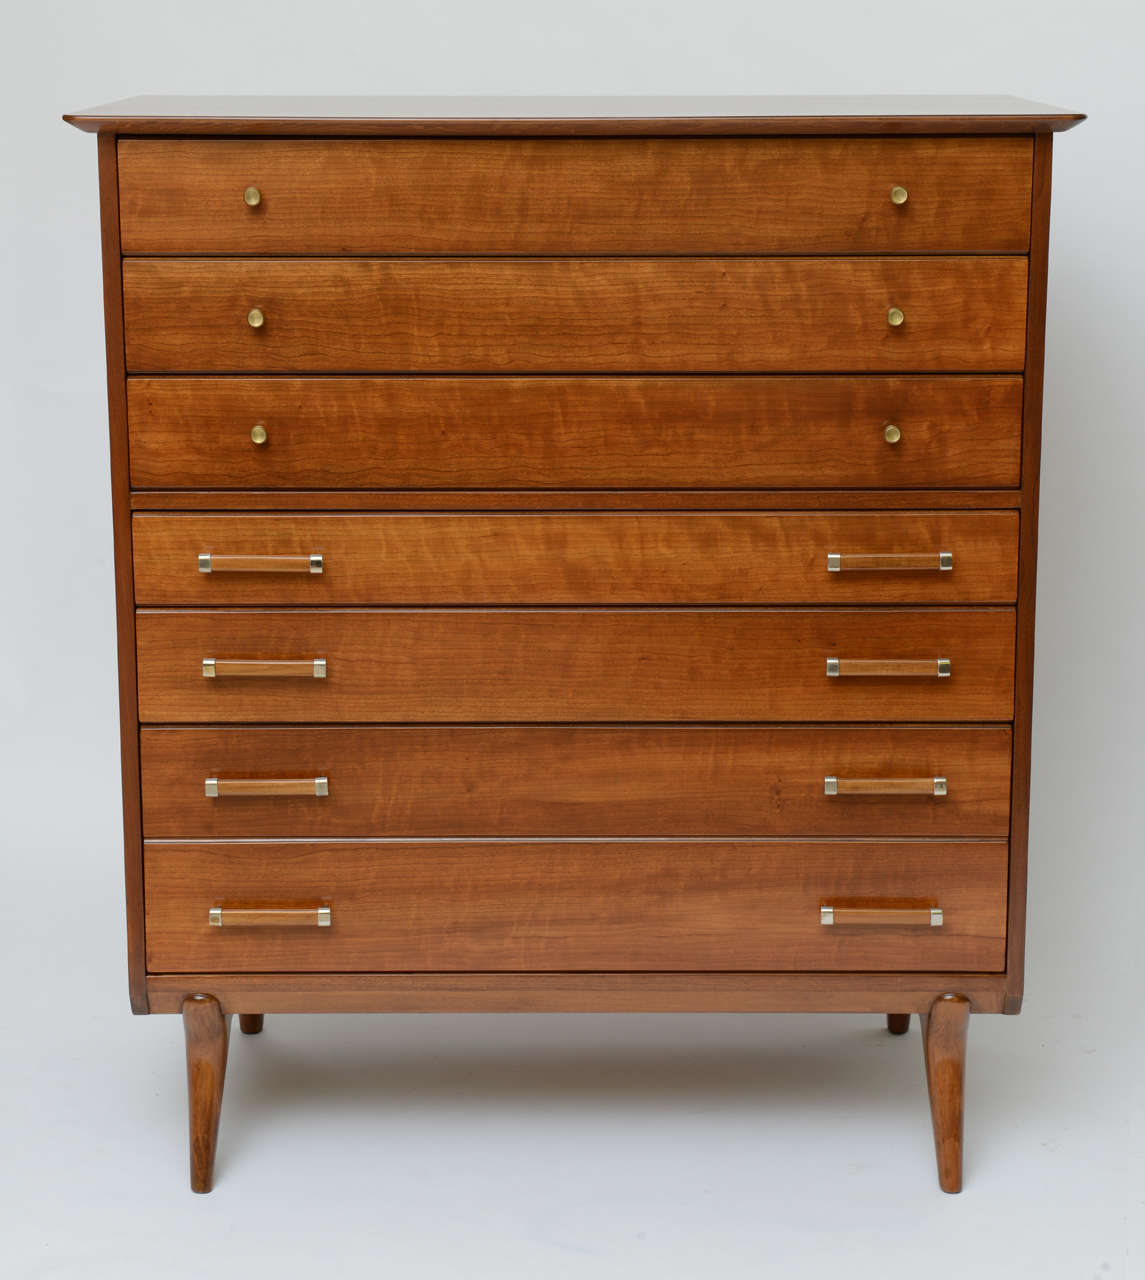 SOLD Beautifully figured cherry wood throughout highlights this chest of drawers or gentleman's chest designed by Renzo Rutili for Johnson Furniture and deftly restored.  Exceptional storage with six wide drawers and one very deep drawer.  The top